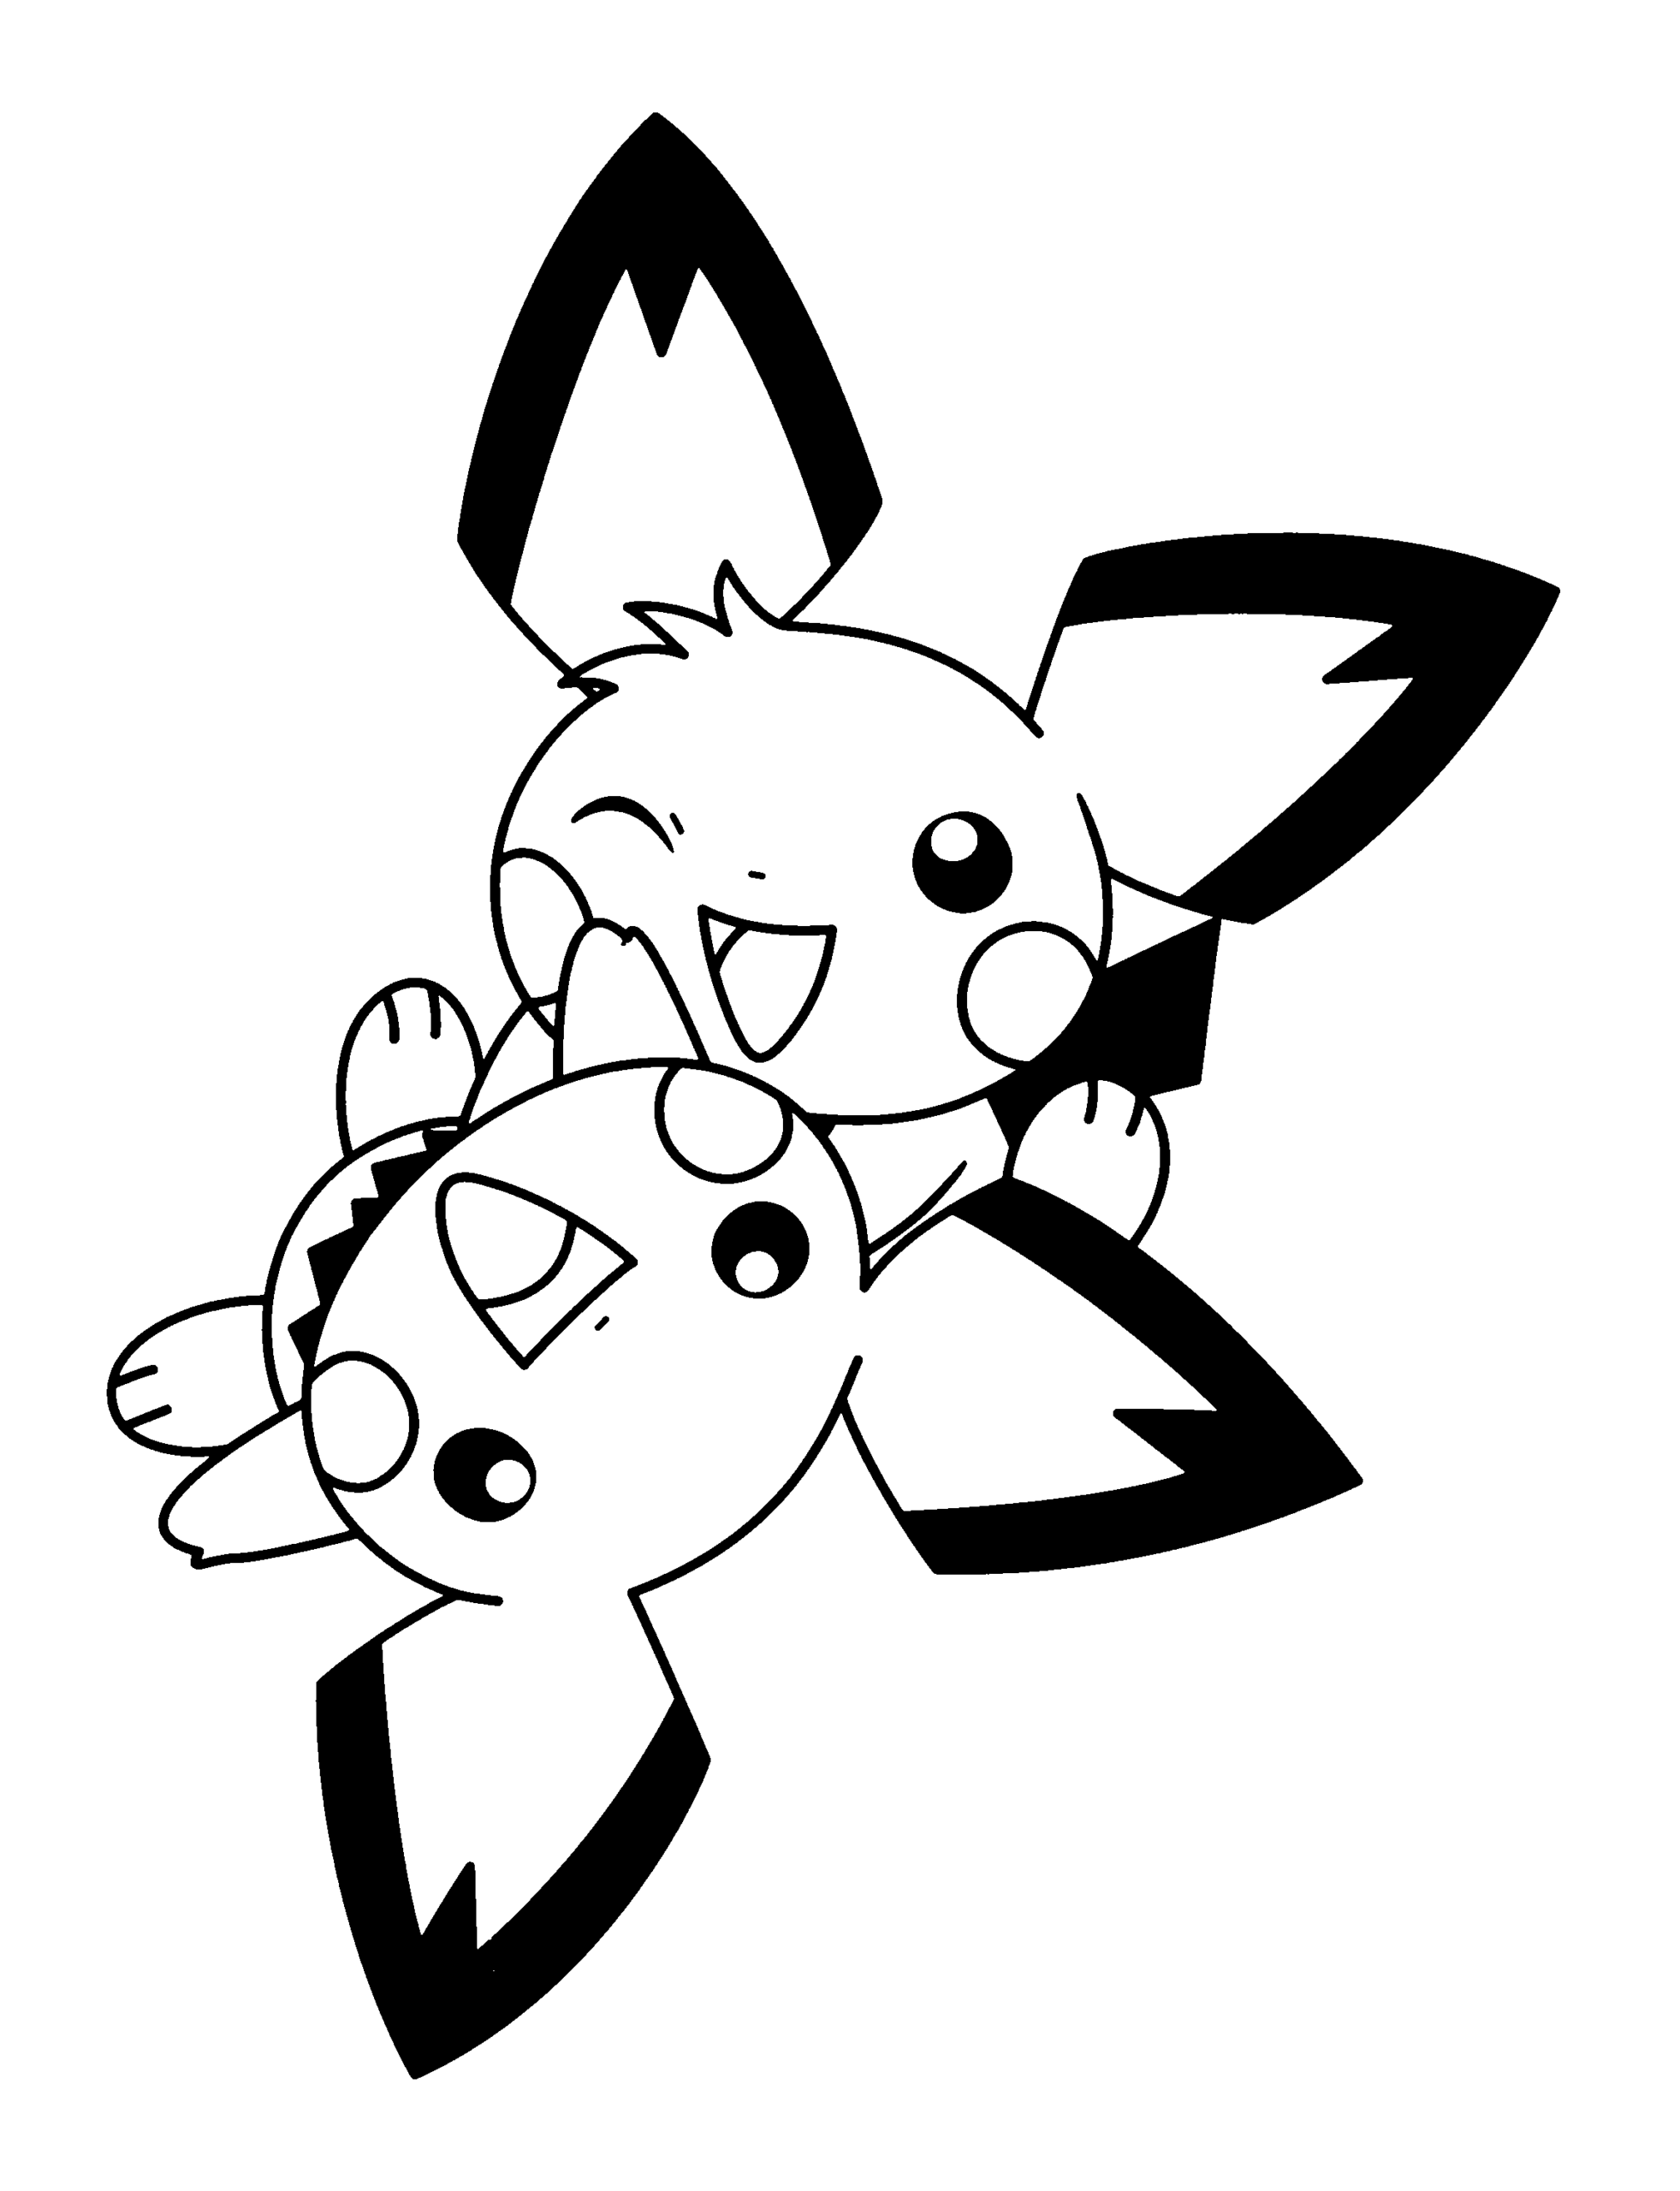 Pikachu Printable Coloring Pages Anime Pikachu Sheets for Free 2021 0955 Coloring4free